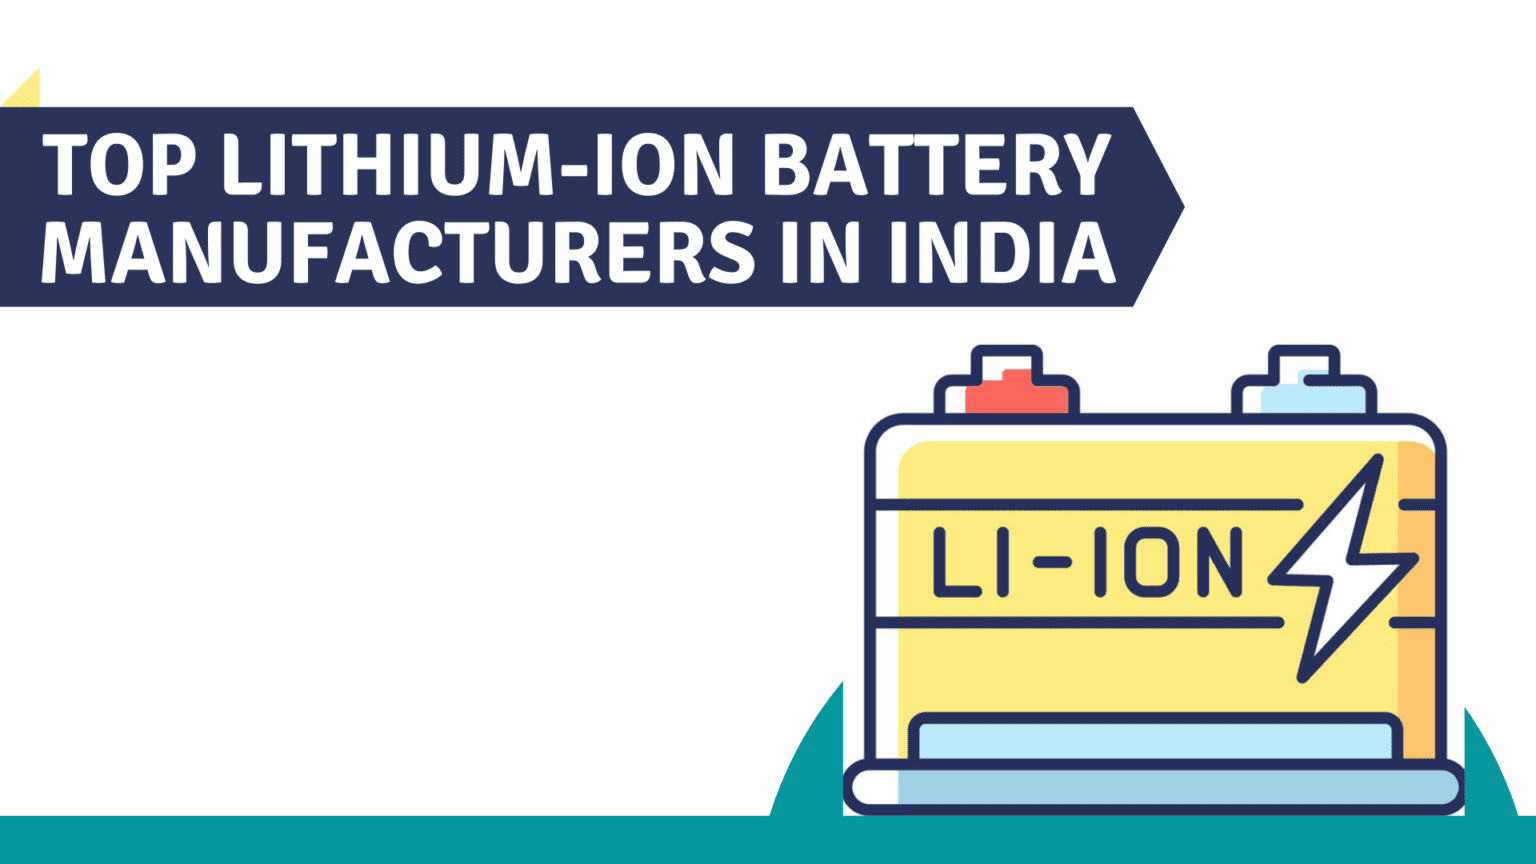 India's Largest LithiumIon Battery Manufacturers Evehicleinfo